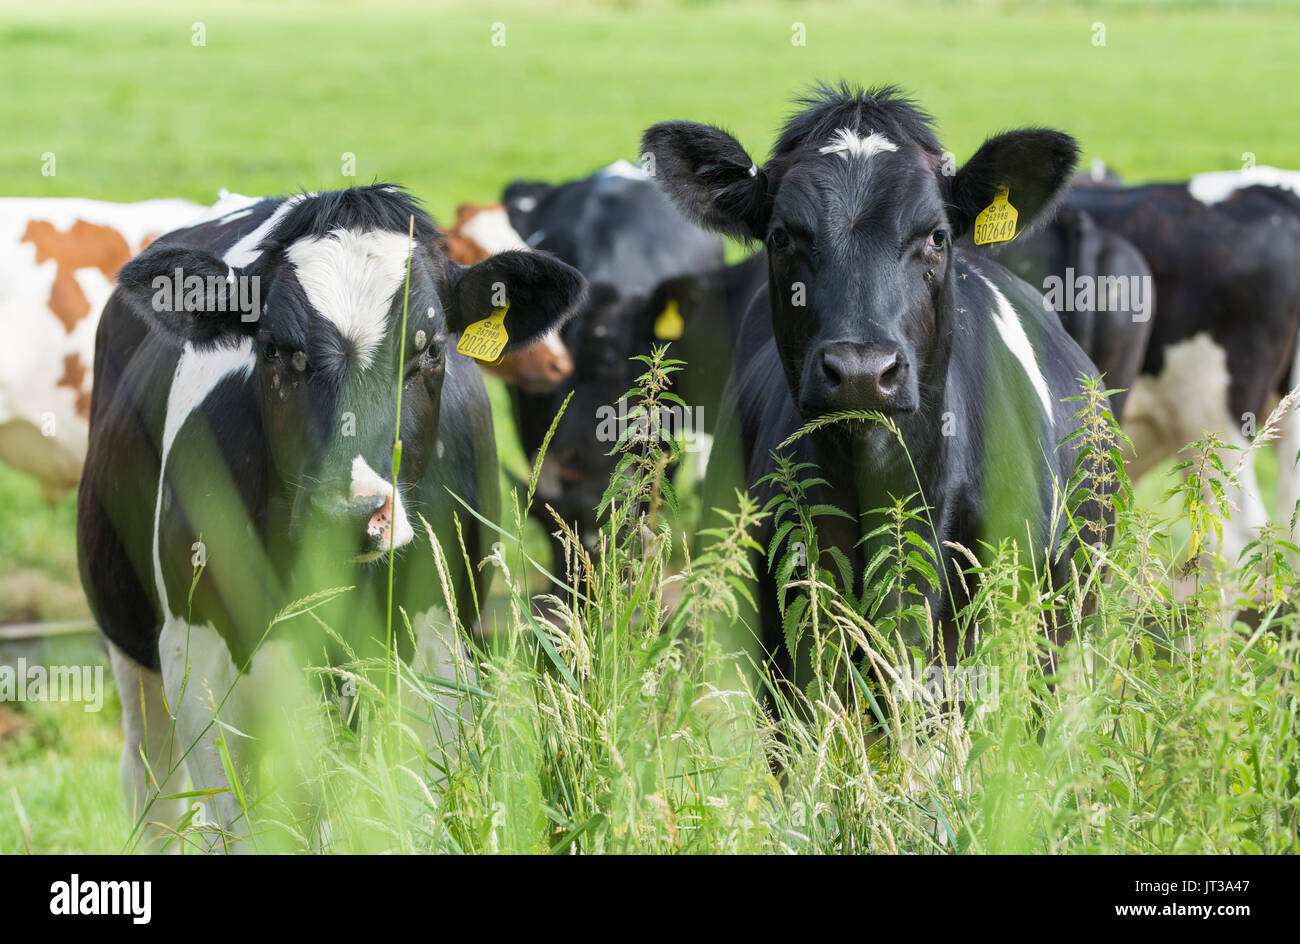 Black and white cows in a field in the UK, looking at the camera. Stock Photo